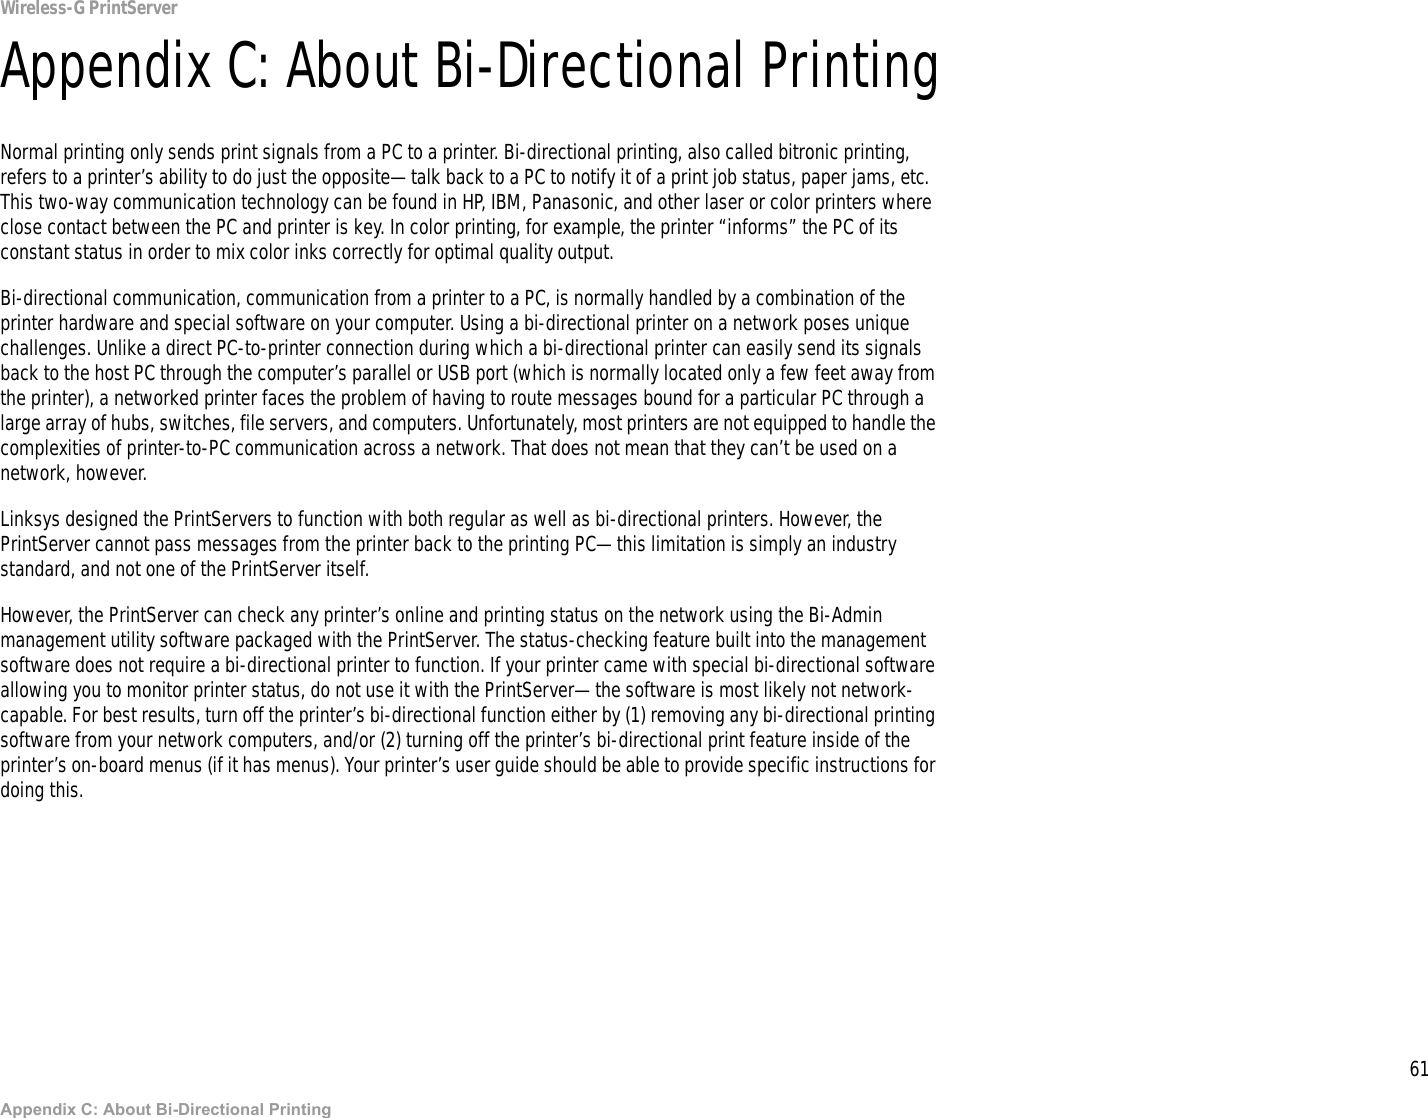 61Appendix C: About Bi-Directional PrintingWireless-G PrintServerAppendix C: About Bi-Directional PrintingNormal printing only sends print signals from a PC to a printer. Bi-directional printing, also called bitronic printing, refers to a printer’s ability to do just the opposite—talk back to a PC to notify it of a print job status, paper jams, etc. This two-way communication technology can be found in HP, IBM, Panasonic, and other laser or color printers where close contact between the PC and printer is key. In color printing, for example, the printer “informs” the PC of its constant status in order to mix color inks correctly for optimal quality output. Bi-directional communication, communication from a printer to a PC, is normally handled by a combination of the printer hardware and special software on your computer. Using a bi-directional printer on a network poses unique challenges. Unlike a direct PC-to-printer connection during which a bi-directional printer can easily send its signals back to the host PC through the computer’s parallel or USB port (which is normally located only a few feet away from the printer), a networked printer faces the problem of having to route messages bound for a particular PC through a large array of hubs, switches, file servers, and computers. Unfortunately, most printers are not equipped to handle the complexities of printer-to-PC communication across a network. That does not mean that they can’t be used on a network, however.Linksys designed the PrintServers to function with both regular as well as bi-directional printers. However, the PrintServer cannot pass messages from the printer back to the printing PC—this limitation is simply an industry standard, and not one of the PrintServer itself.However, the PrintServer can check any printer’s online and printing status on the network using the Bi-Admin management utility software packaged with the PrintServer. The status-checking feature built into the management software does not require a bi-directional printer to function. If your printer came with special bi-directional software allowing you to monitor printer status, do not use it with the PrintServer—the software is most likely not network-capable. For best results, turn off the printer’s bi-directional function either by (1) removing any bi-directional printing software from your network computers, and/or (2) turning off the printer’s bi-directional print feature inside of the printer’s on-board menus (if it has menus). Your printer’s user guide should be able to provide specific instructions for doing this.